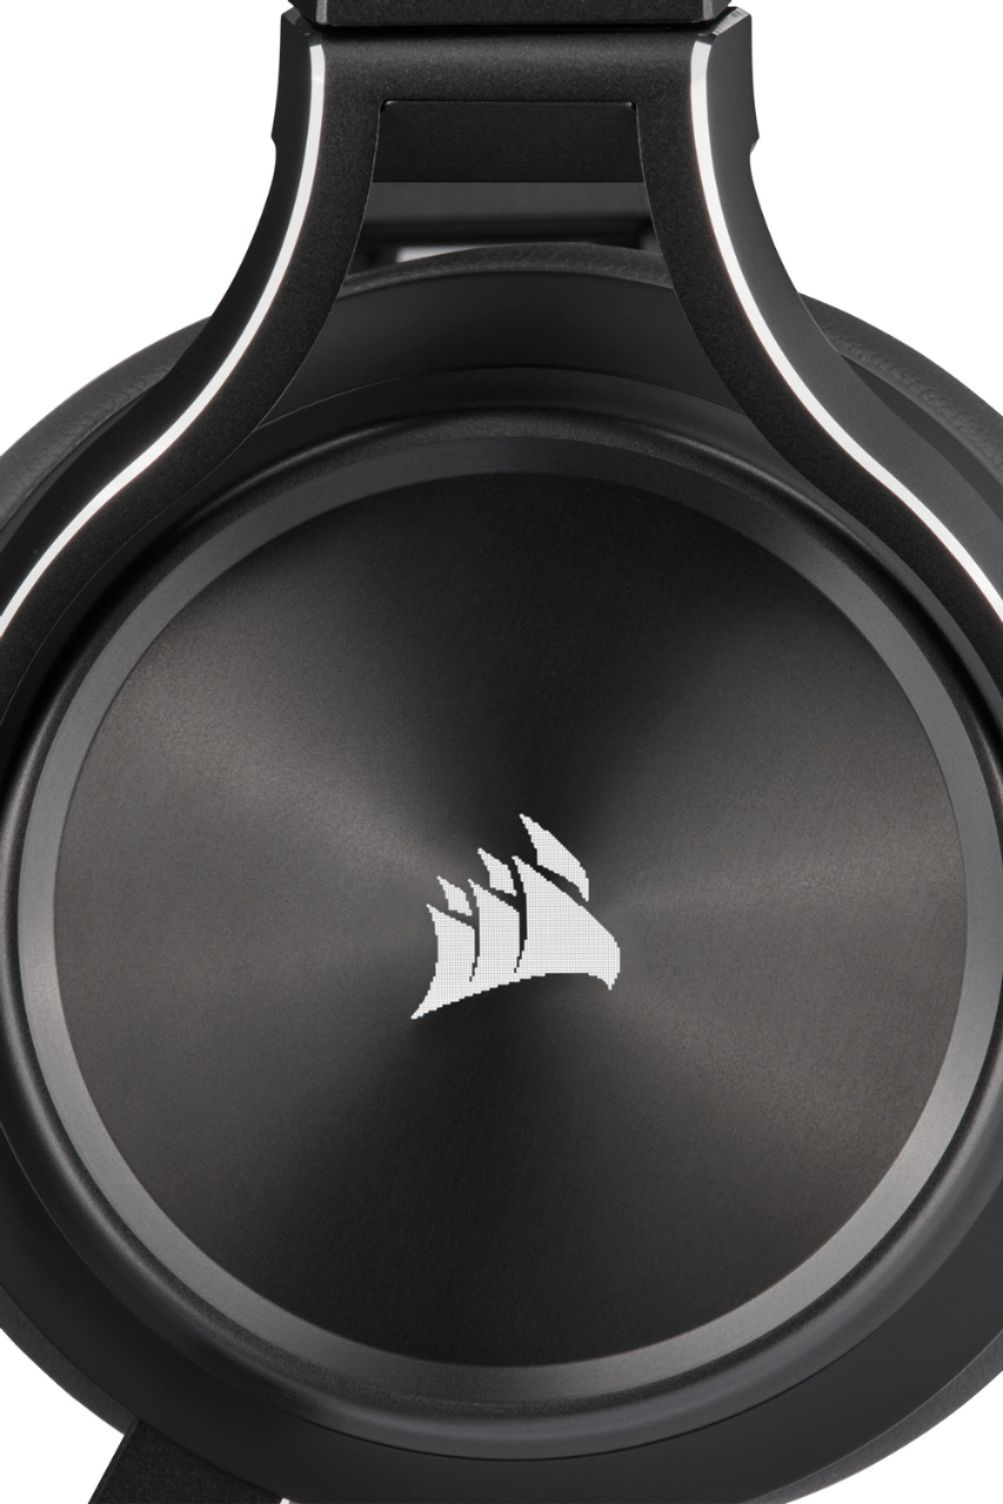  CORSAIR VIRTUOSO RGB WIRELESS XT Multiplatform Gaming Headset  With Bluetooth - Dolby Atmos - Broadcast Quality Microphone - iCUE  Compatible- PC, Mac, PS5, PS4, Nintendo Switch, Mobile - Black : Everything  Else